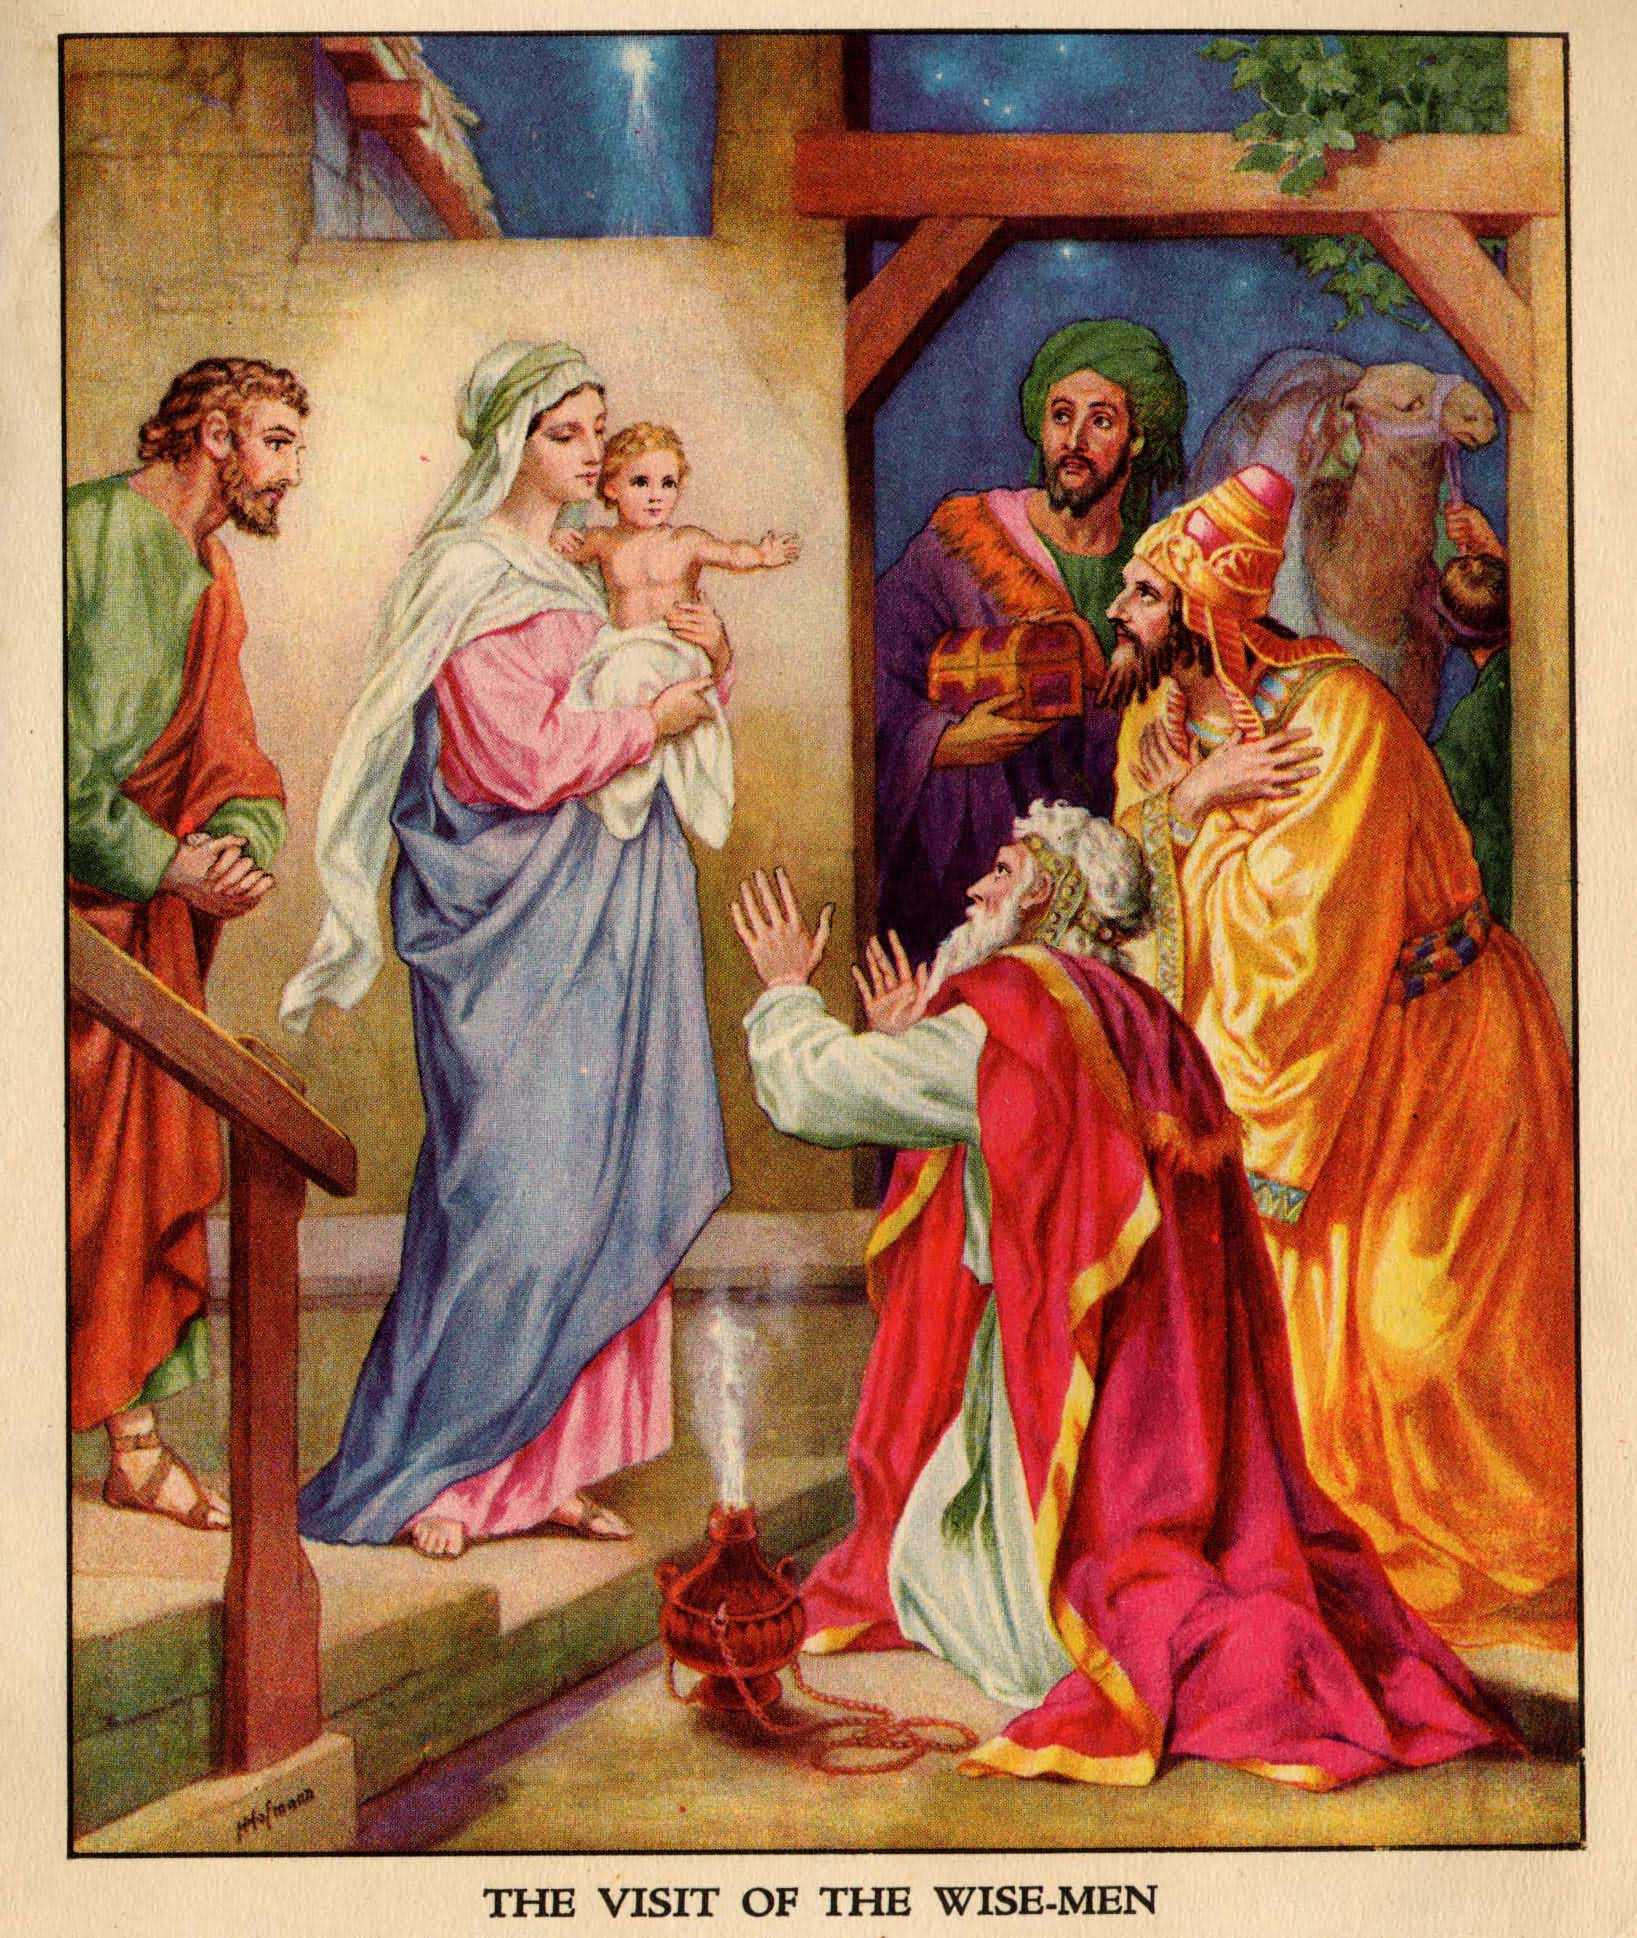 3 Gifts To Baby Jesus
 Were The Three Wisemen Guilty of Bribery Giving Gifts to